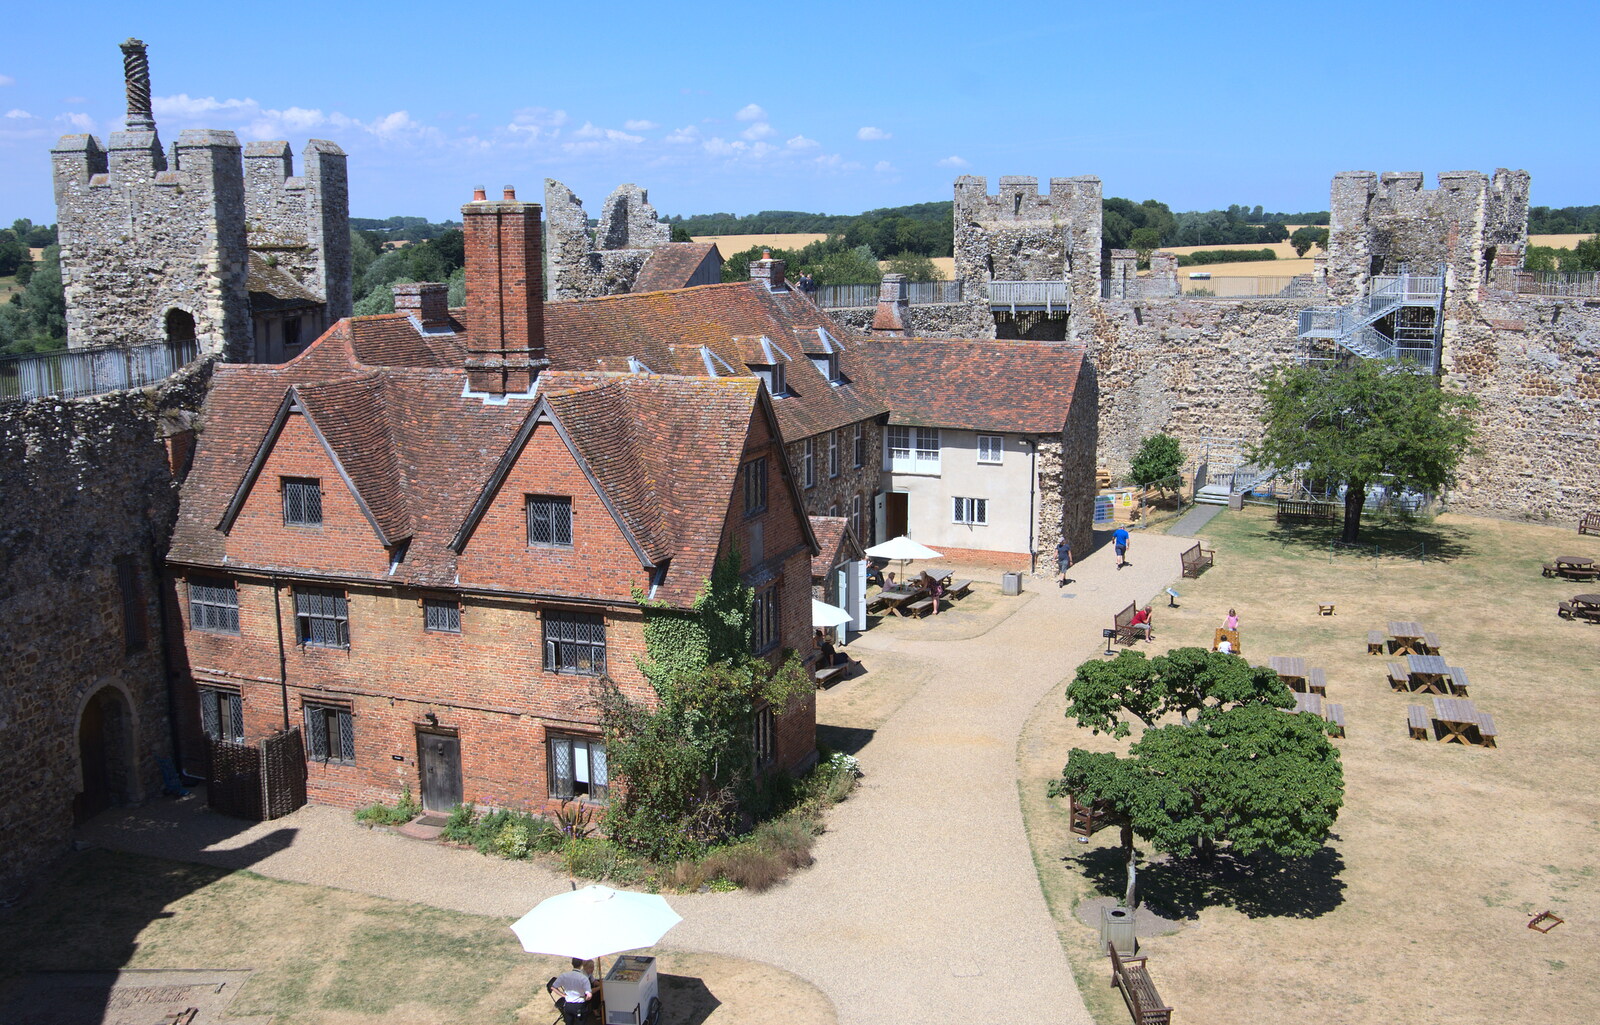 The Red House from the ramparts from A Postcard from the Castle on the Hill, Framlingham, Suffolk - 14th July 2018